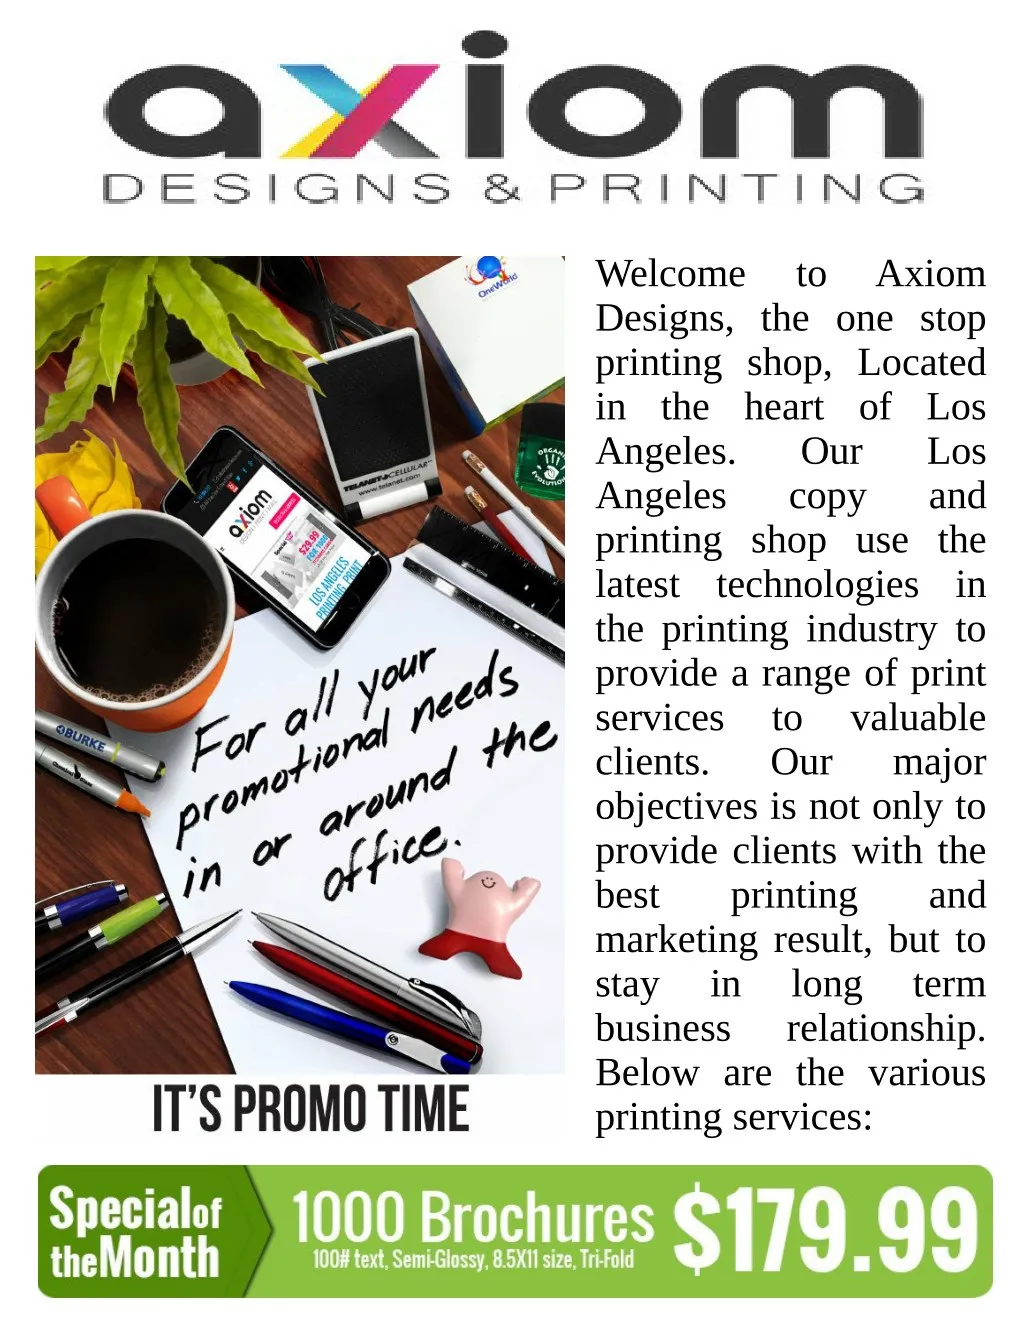 welcome designs the one stop printing shop